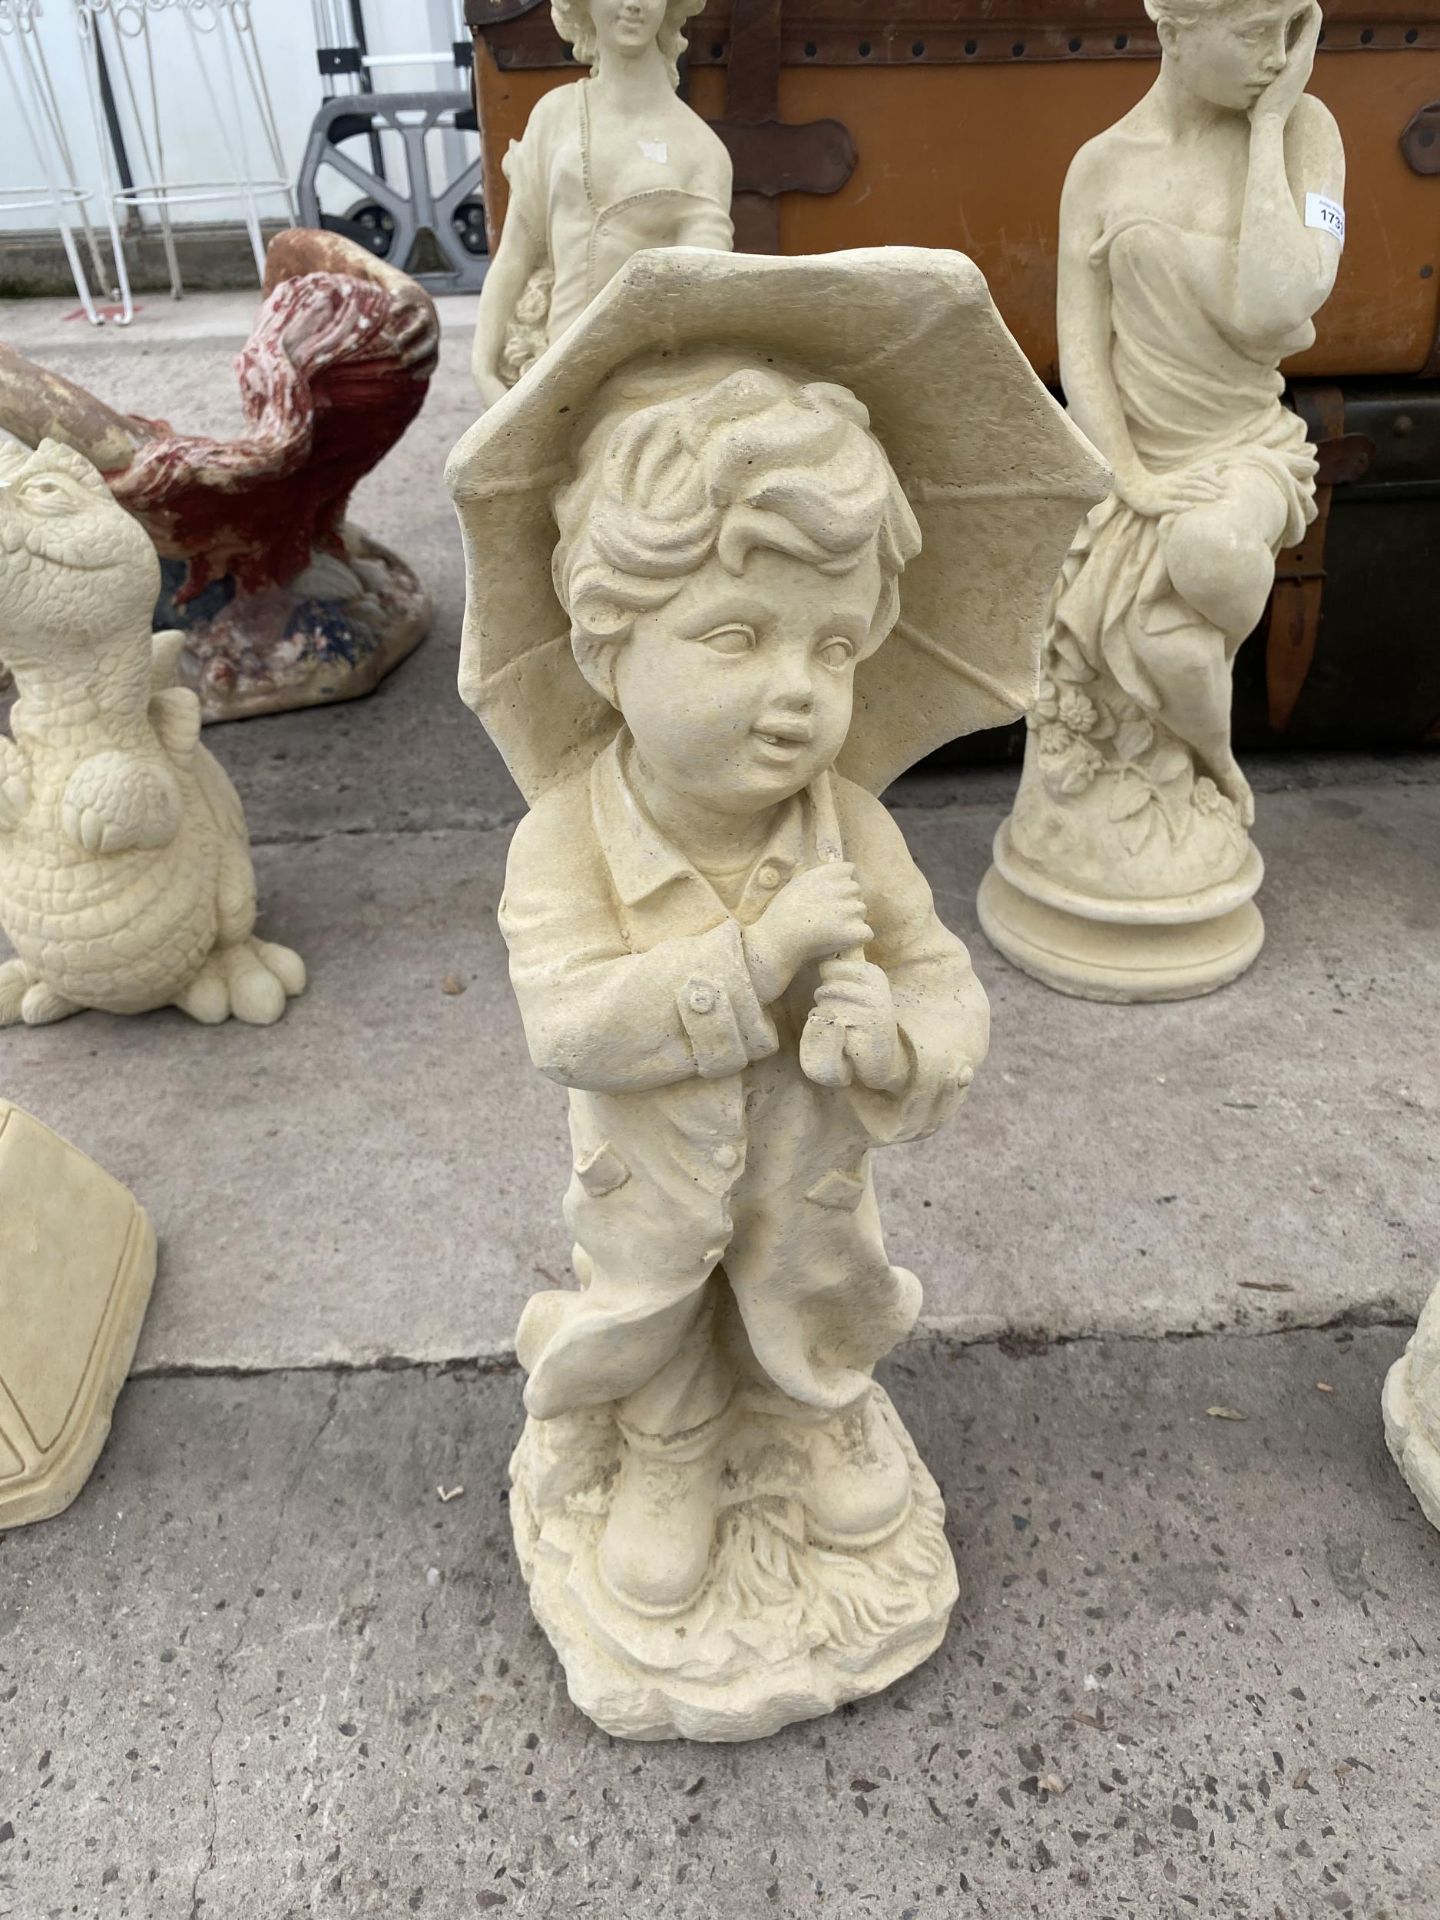 AN AS NEW EX DISPLAY CONCRETE 'JACOB' FIGURE *PLEASE NOTE VAT TO BE PAID ON THIS ITEM*